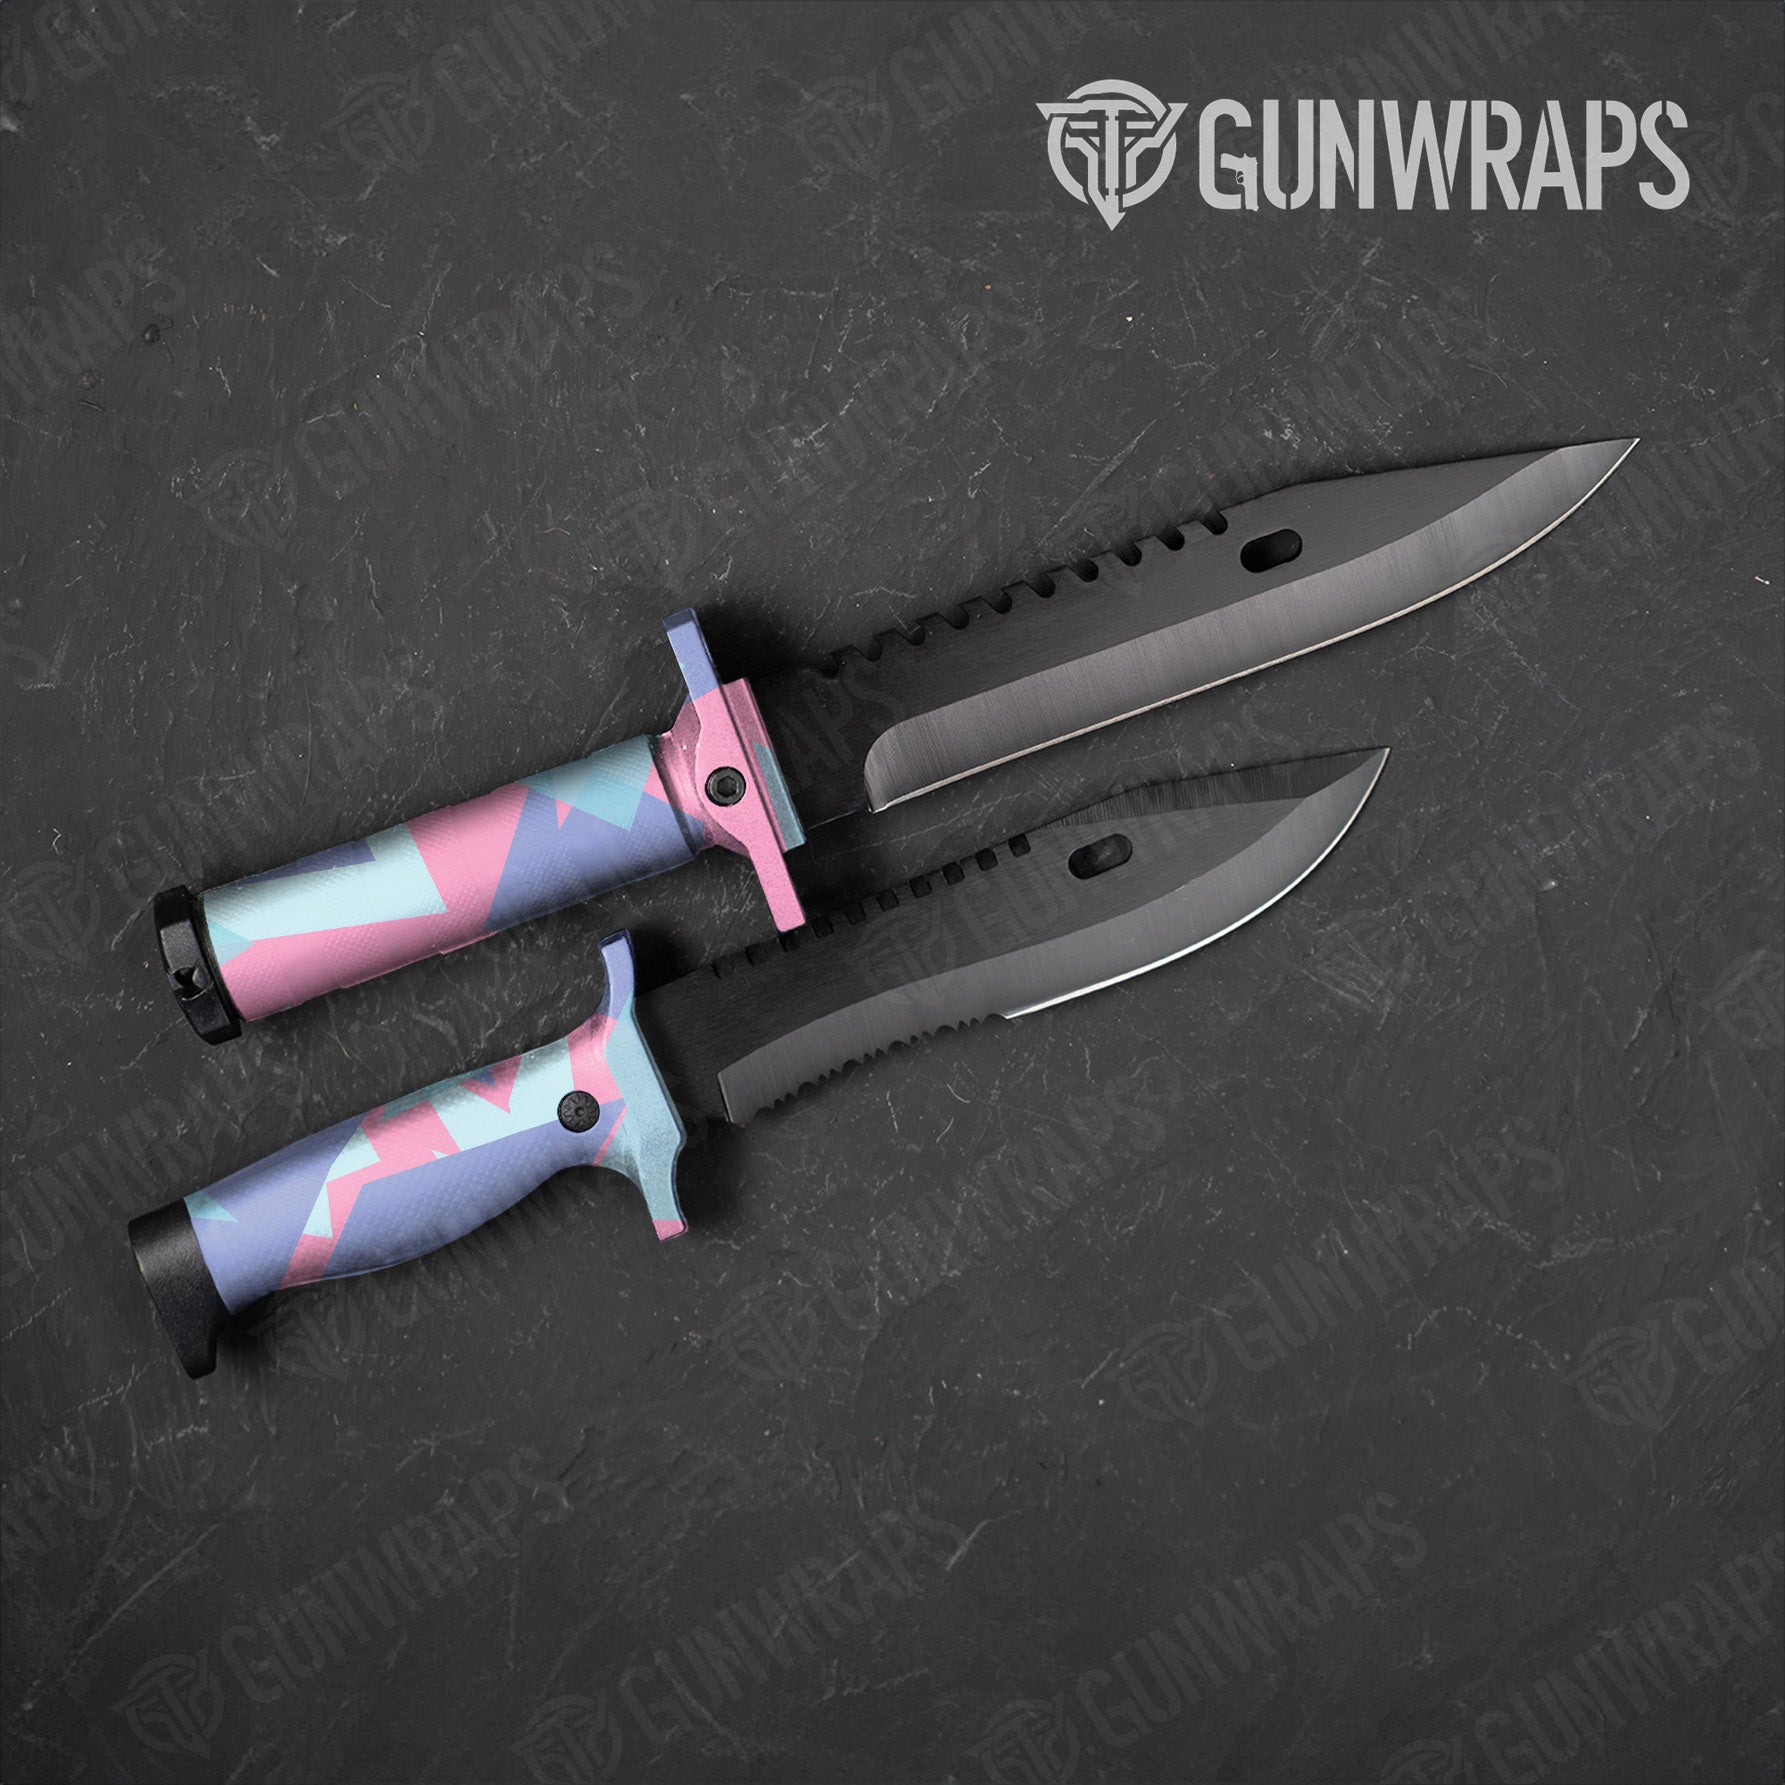 Shattered Cotton Candy Camo Knife Gear Skin Vinyl Wrap